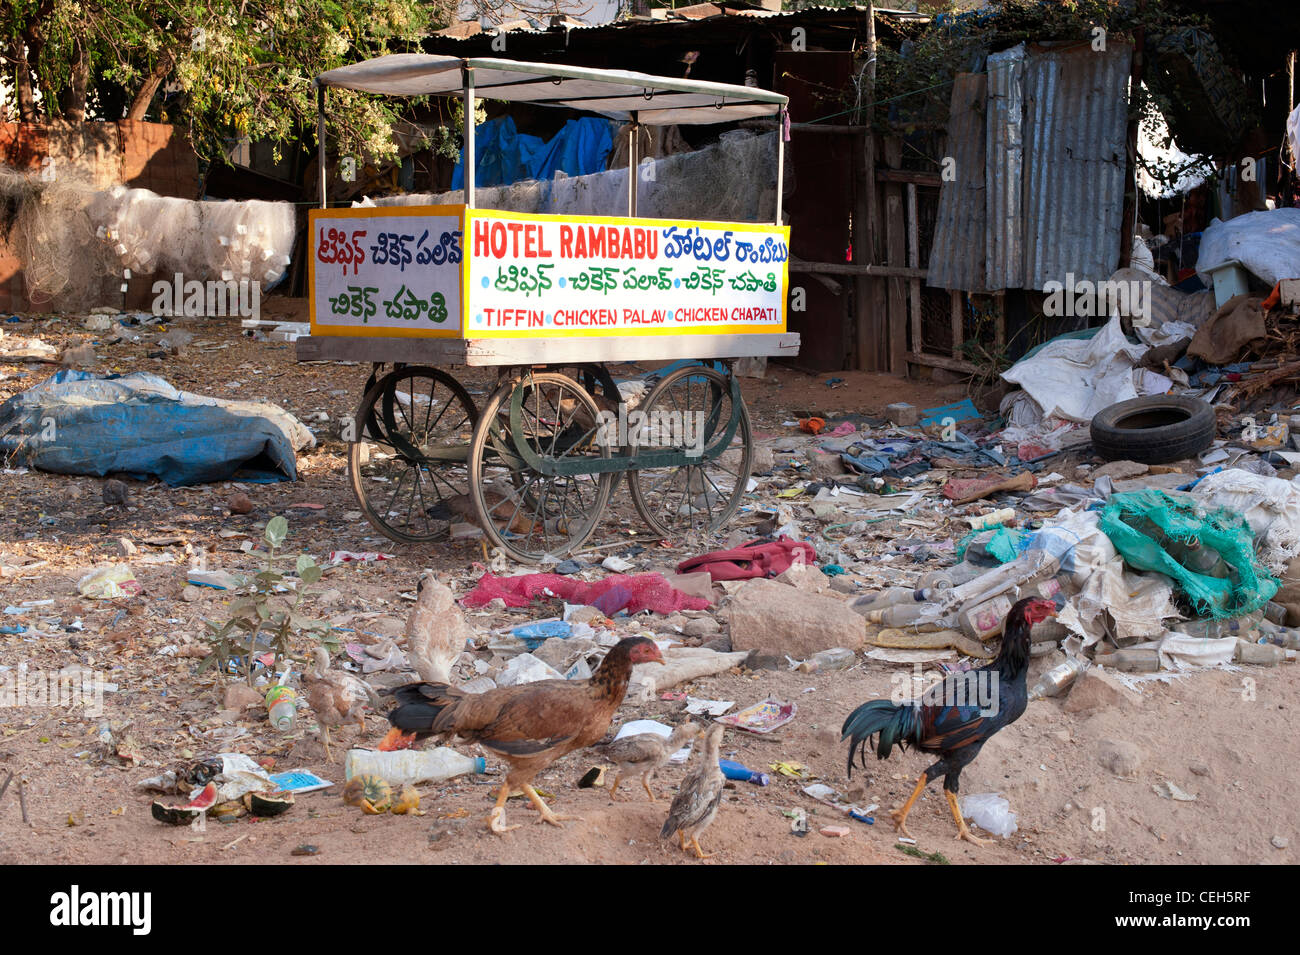 Indian food cart in the middle of a rubbish tip surround by chickens. Andhra Pradesh, India Stock Photo